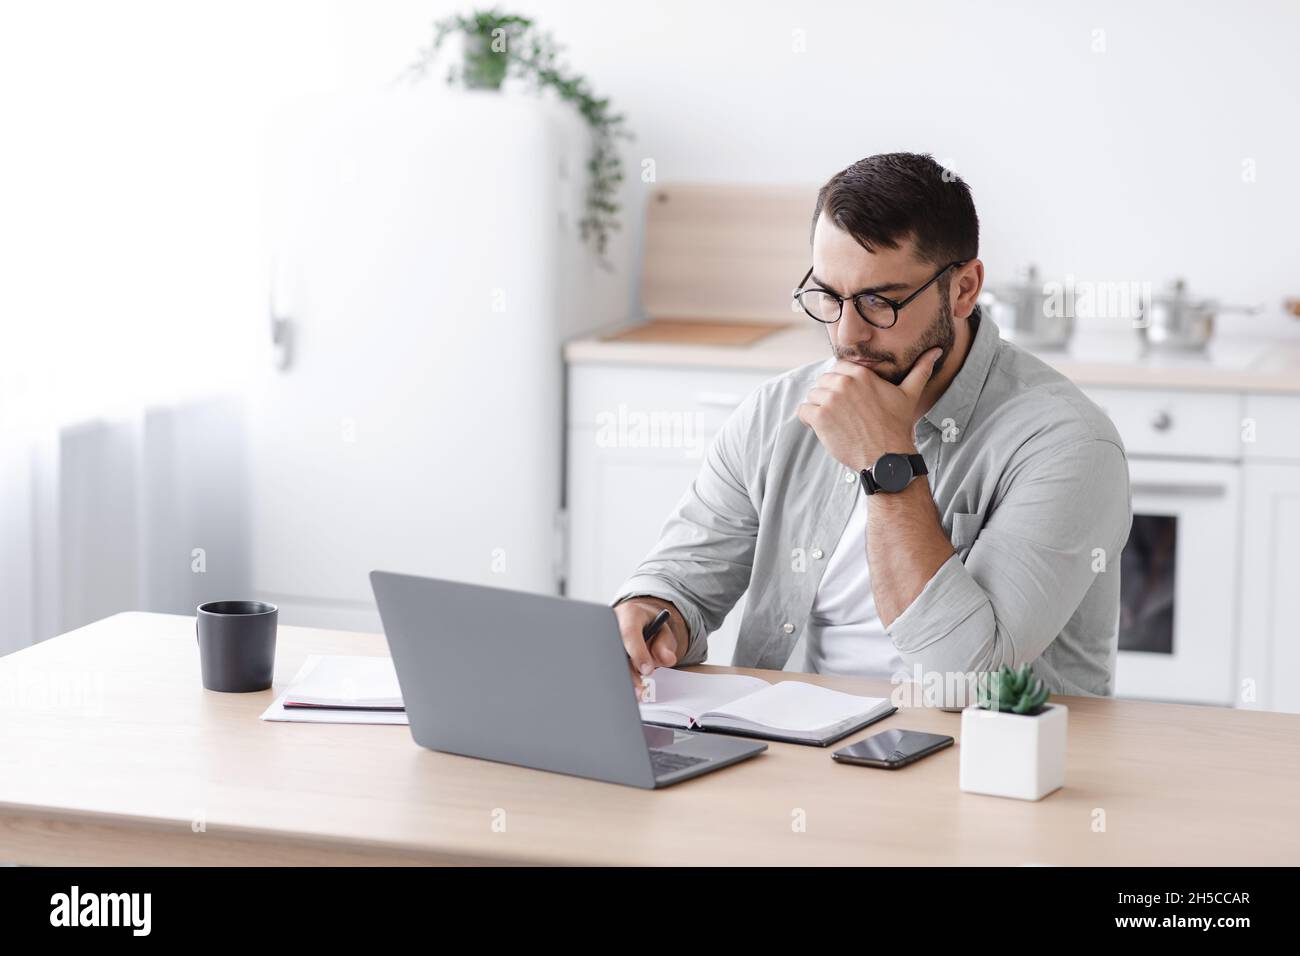 Busy pensive middle aged european businessman in glasses working at computer on minimalist kitchen interior Stock Photo